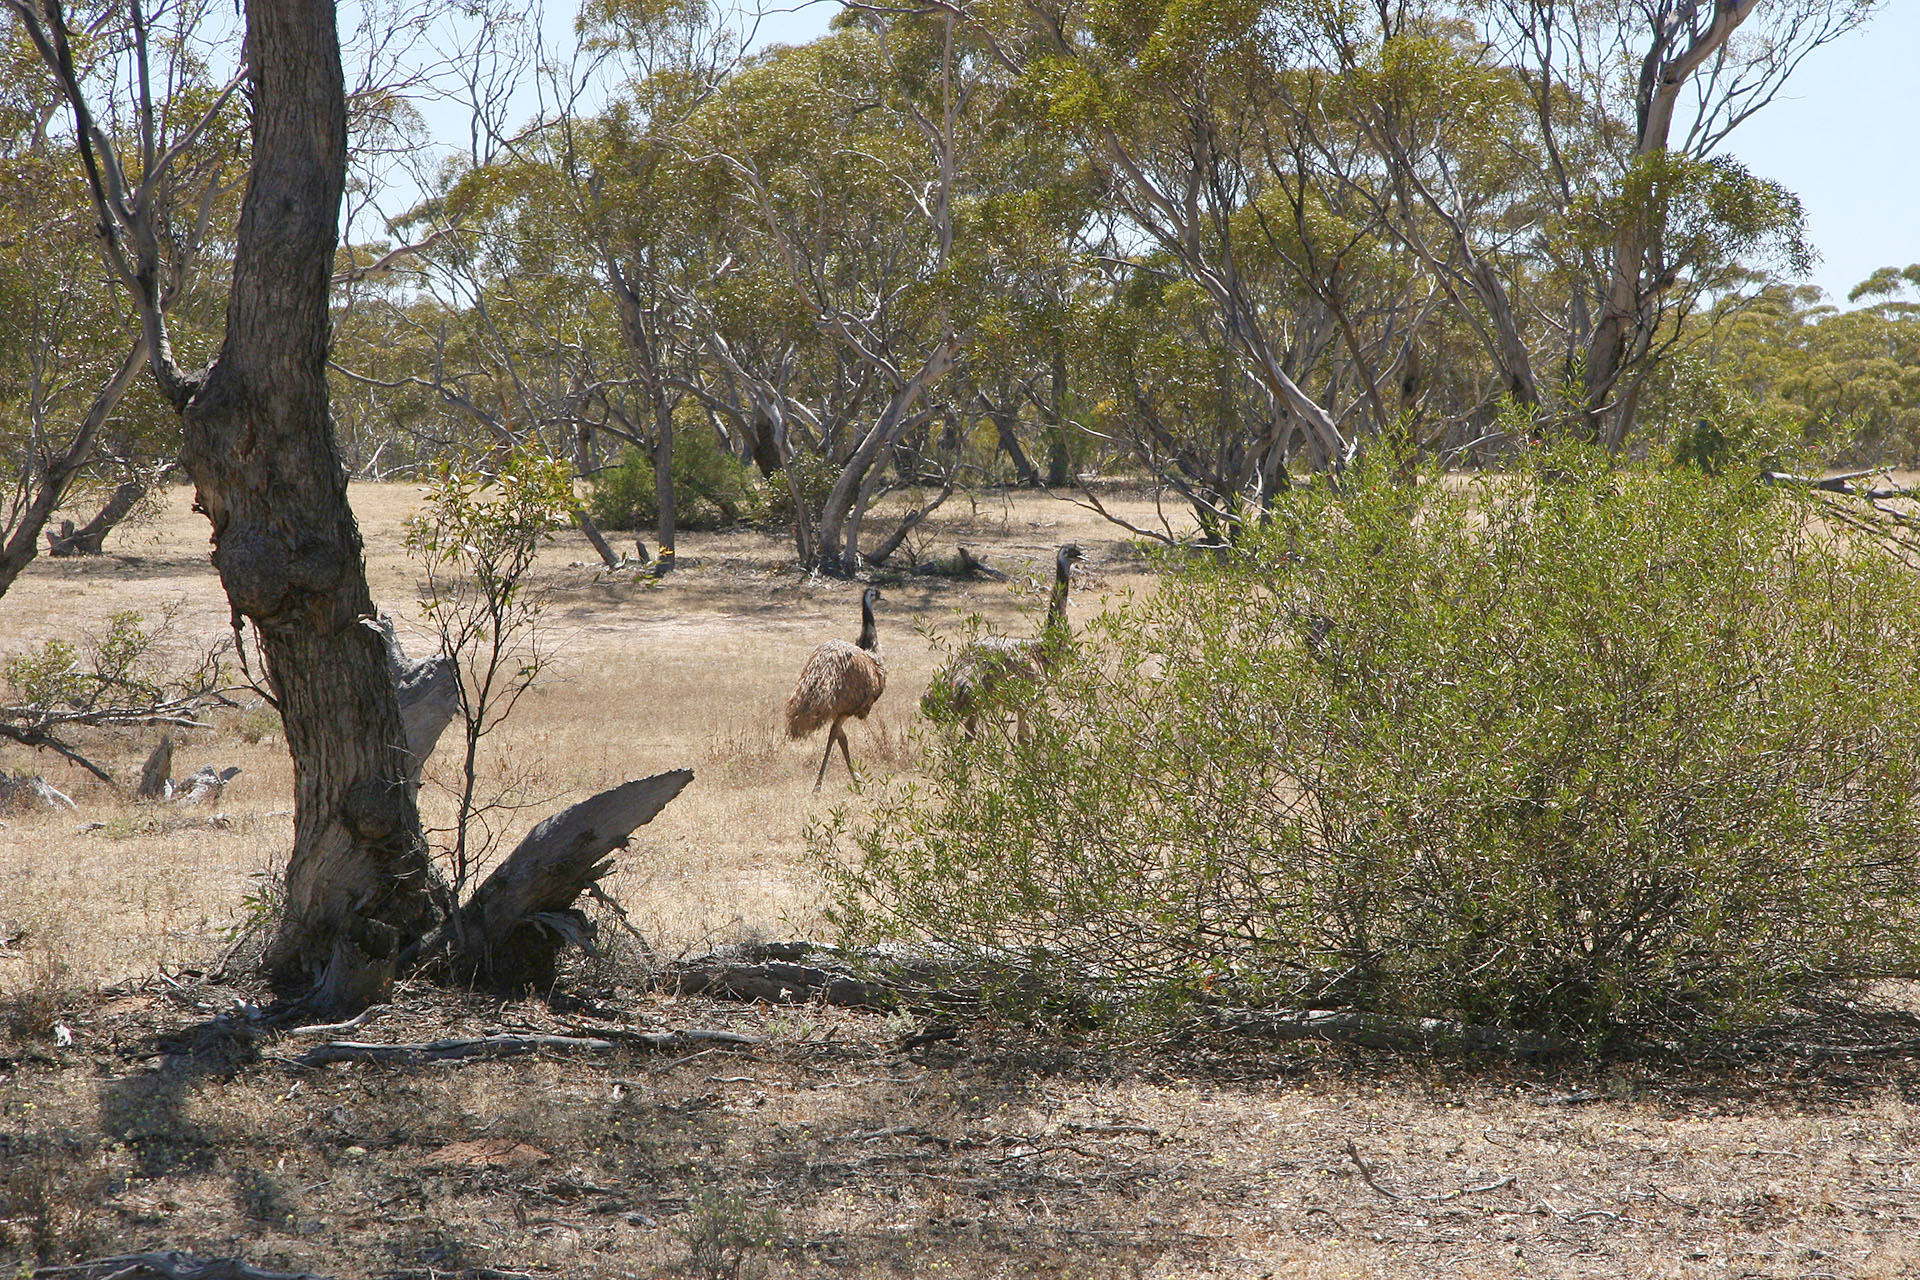 A couple of emus.